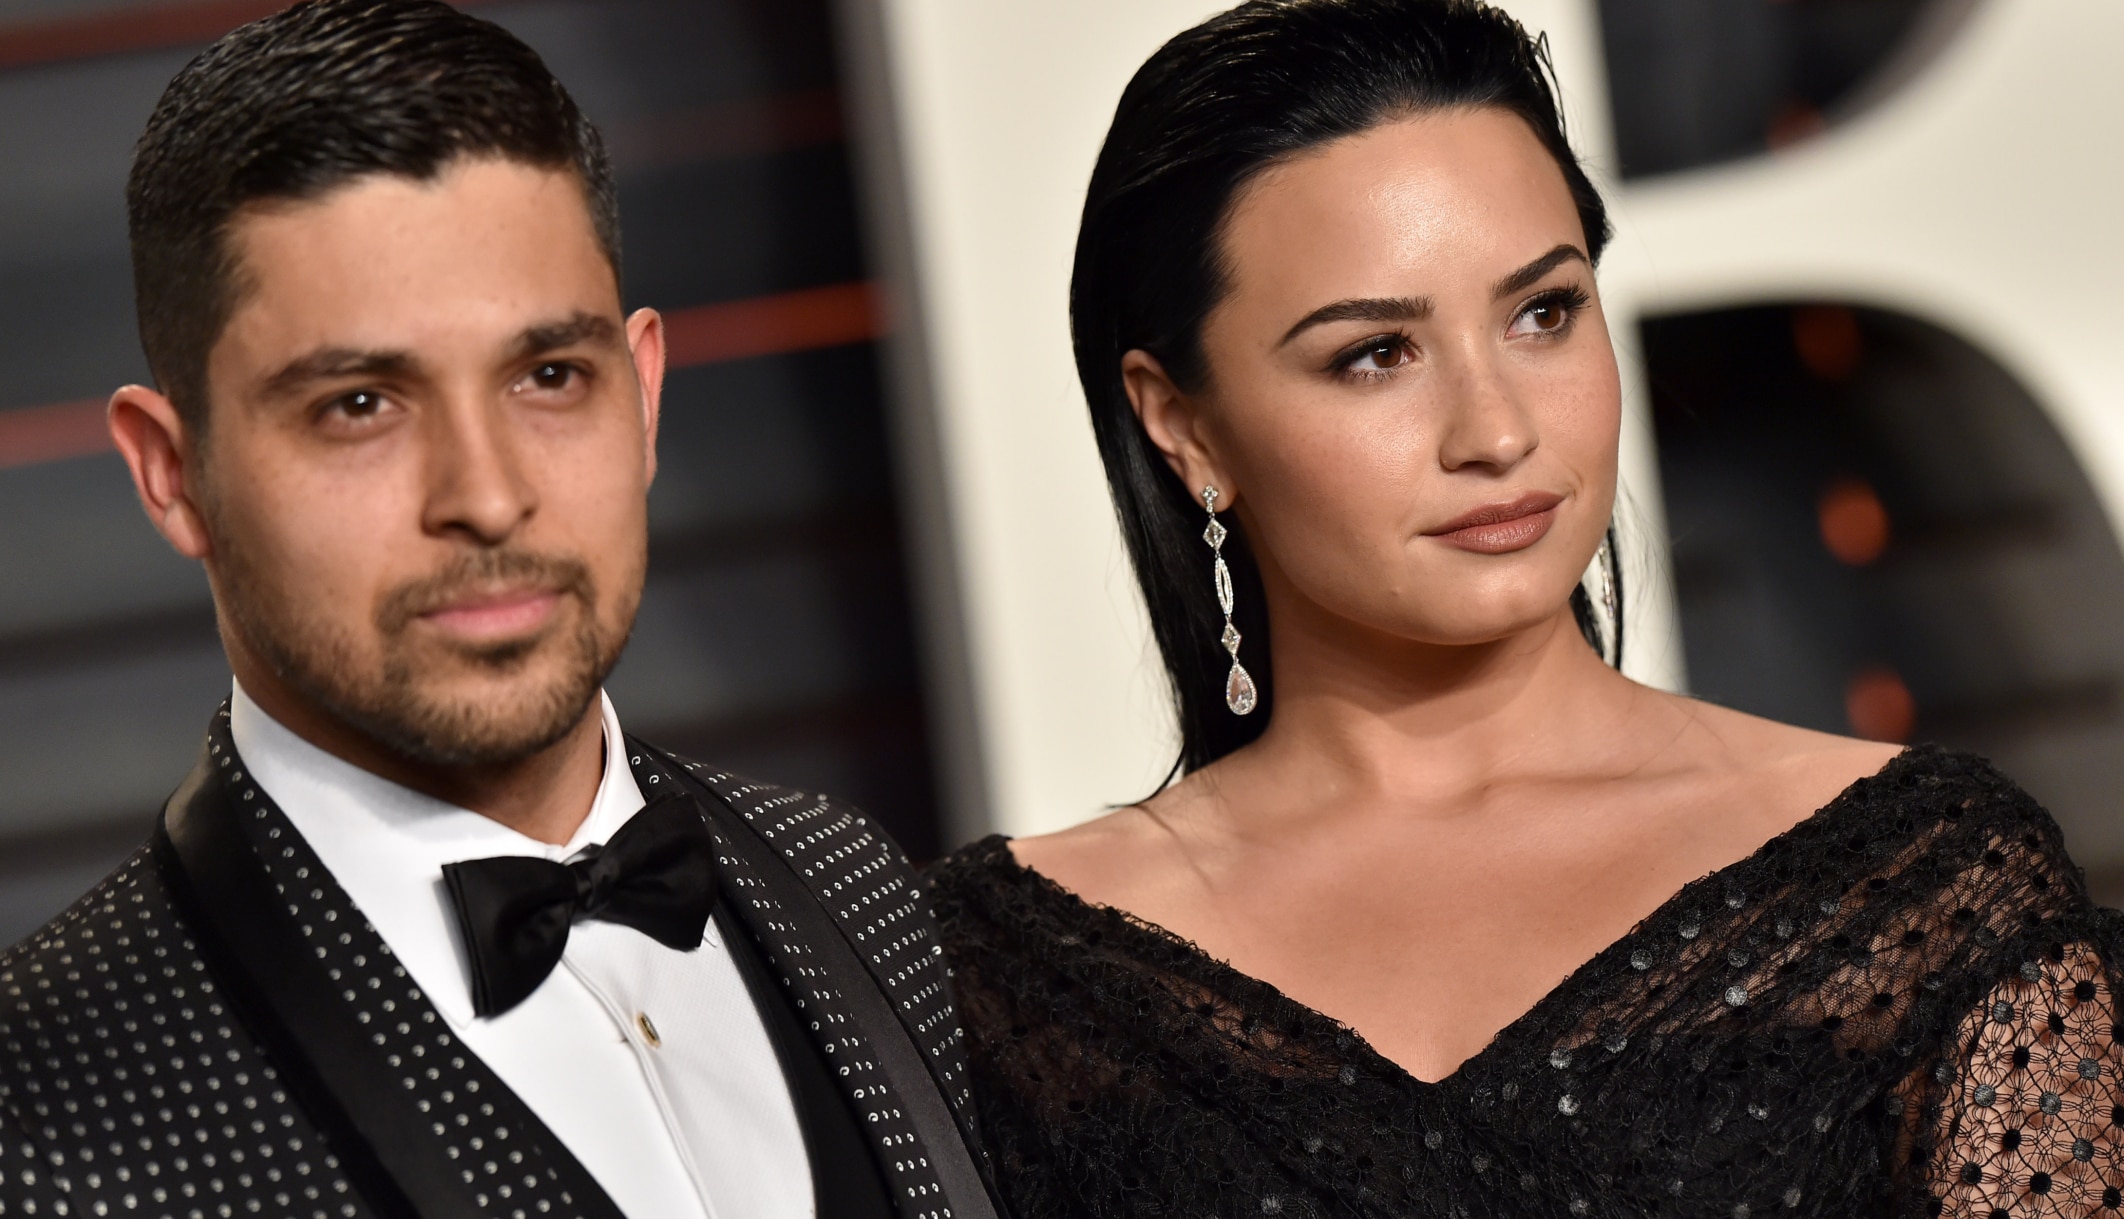 Demi Lovato ‘Getting Better’ With Visits From Ex Wilmer Valderrama | Very Real